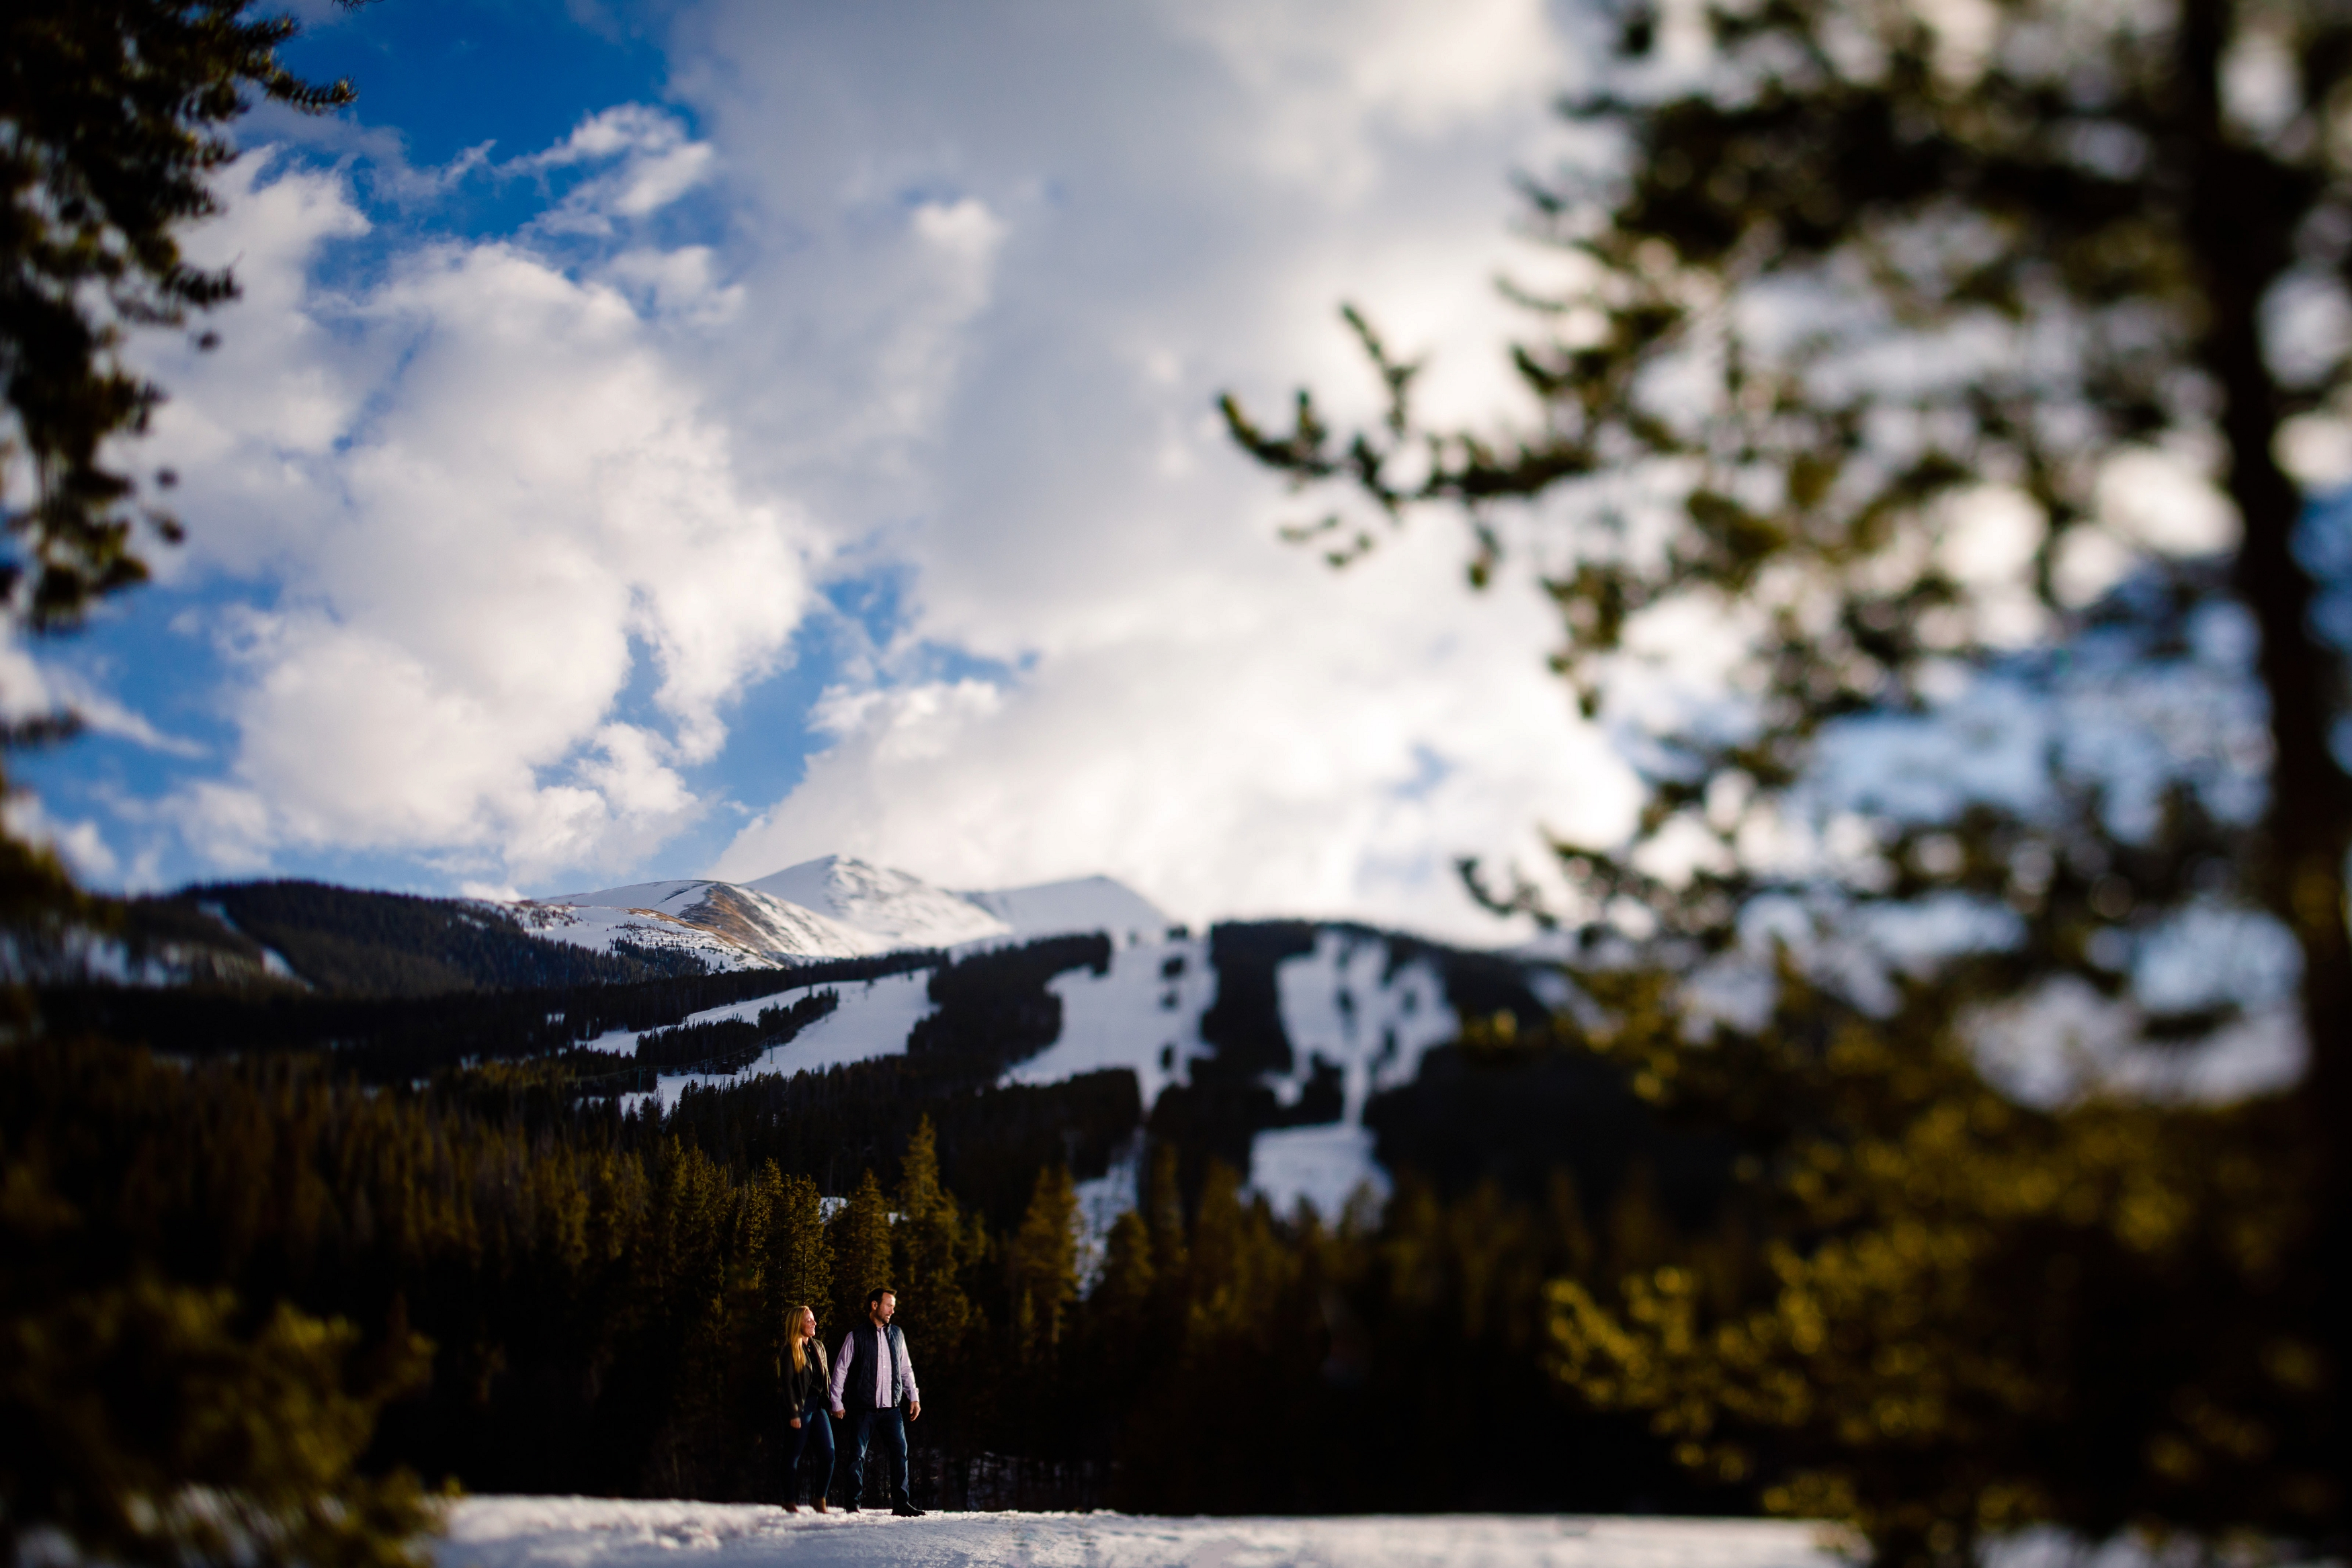 Looking back on Breckenridge Ski Resort for TJ & Donna's engagement session in the Rocky Mountains.